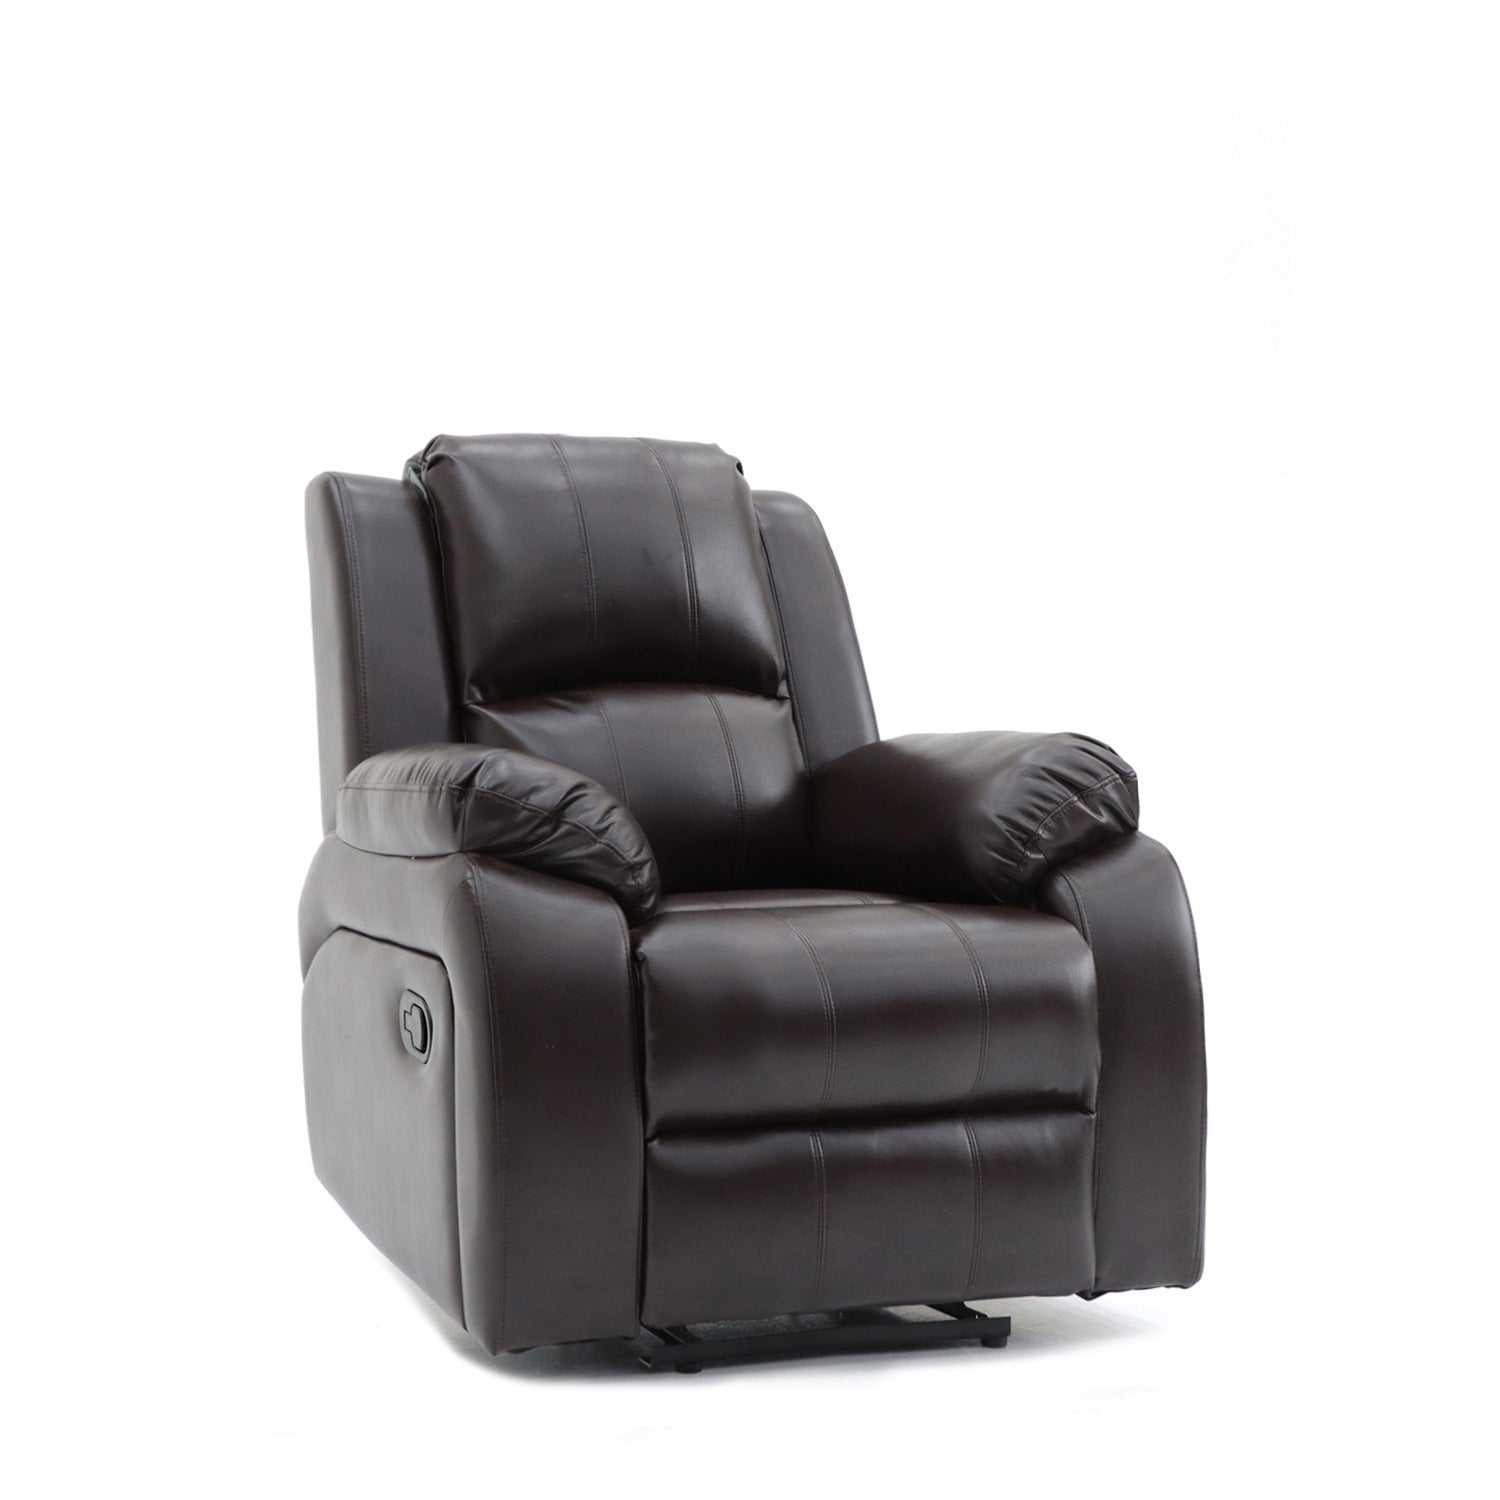 Darwin Power Recliner Chair Brown Leather